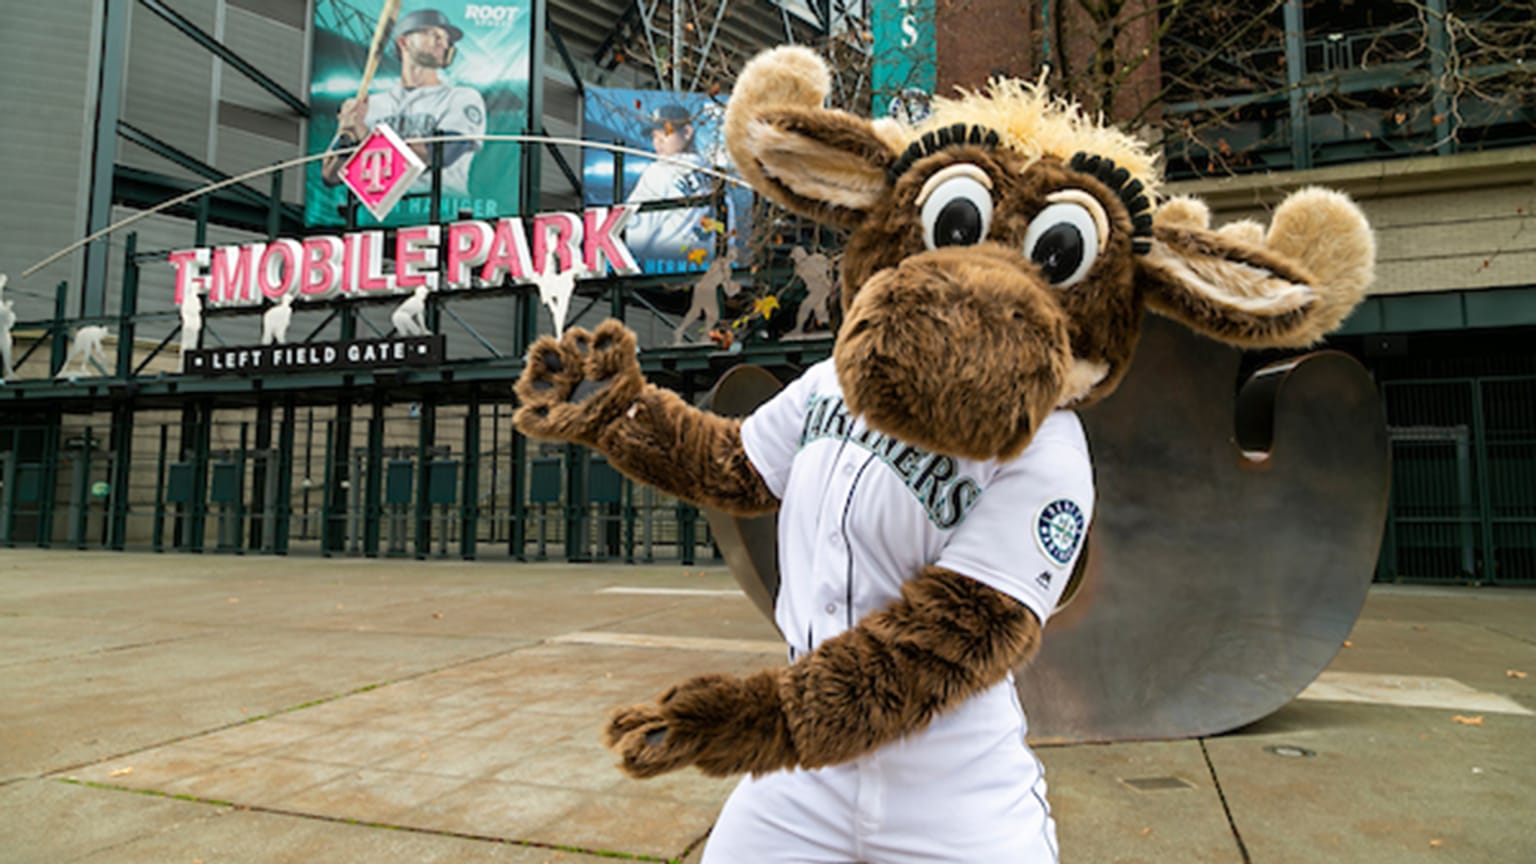 For rent: Mariner Moose doing a lot of moonlighting - Seattle Sports